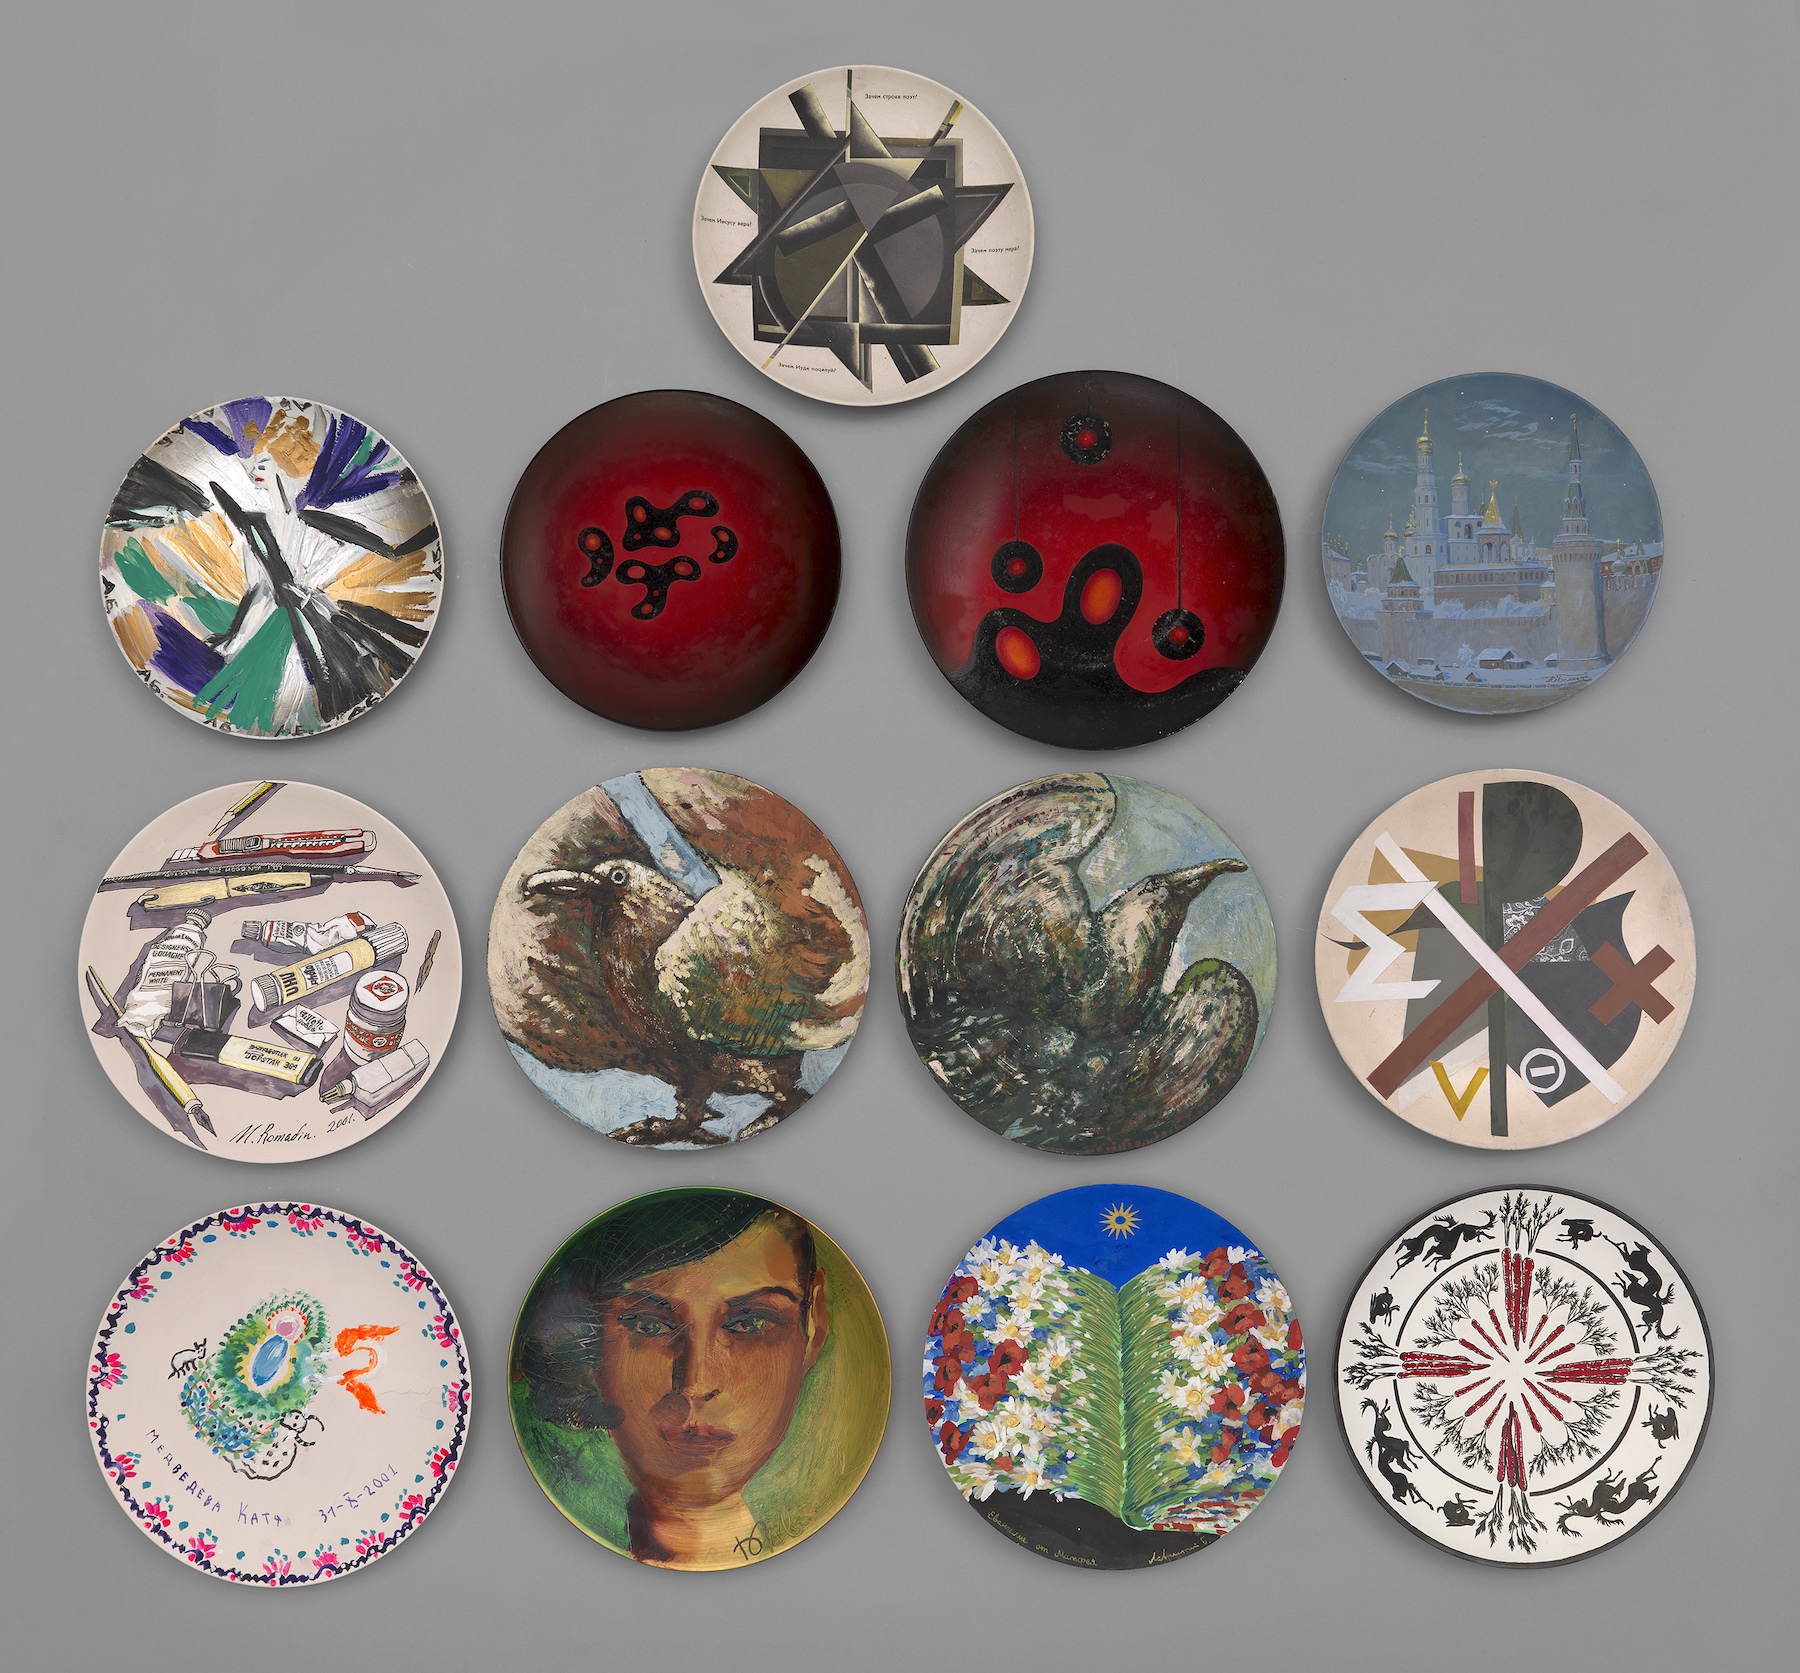 Unique hand-painted plates by renowned Russian contempoary artists, produced for the 2001 exhibition project “Universal Circle”, Moscow, organised by the Cultural Foundation “Zabava” and Association of Art Historians.